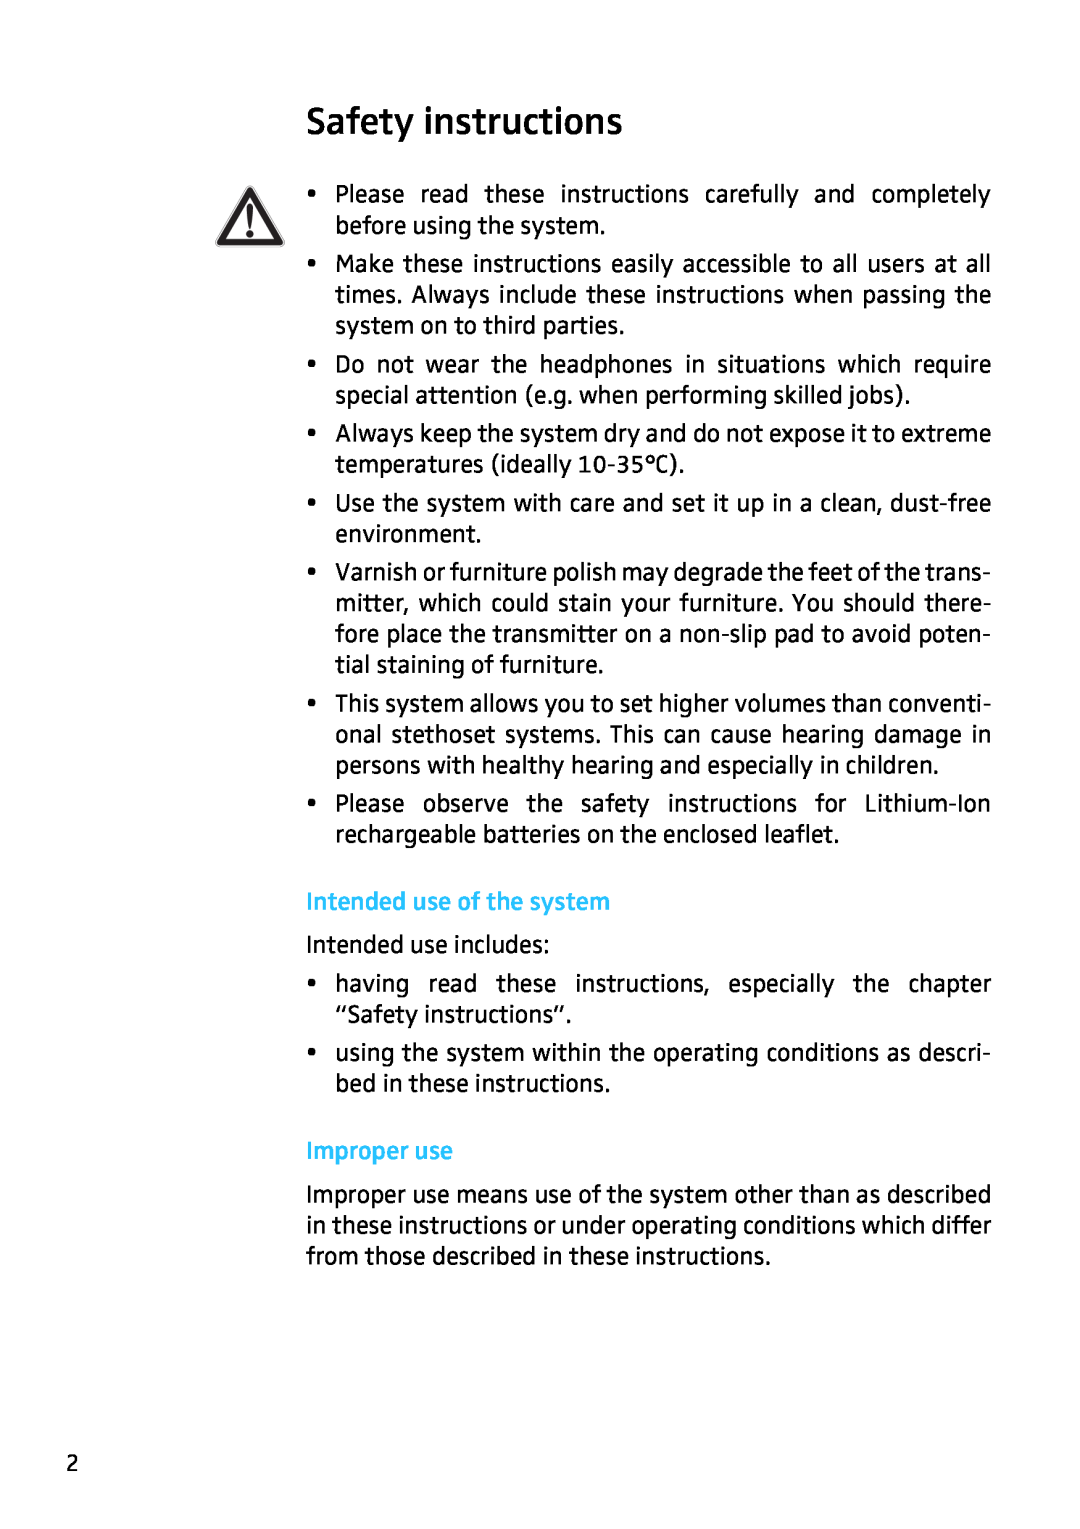 Sennheiser IS410 manual Safety instructions 